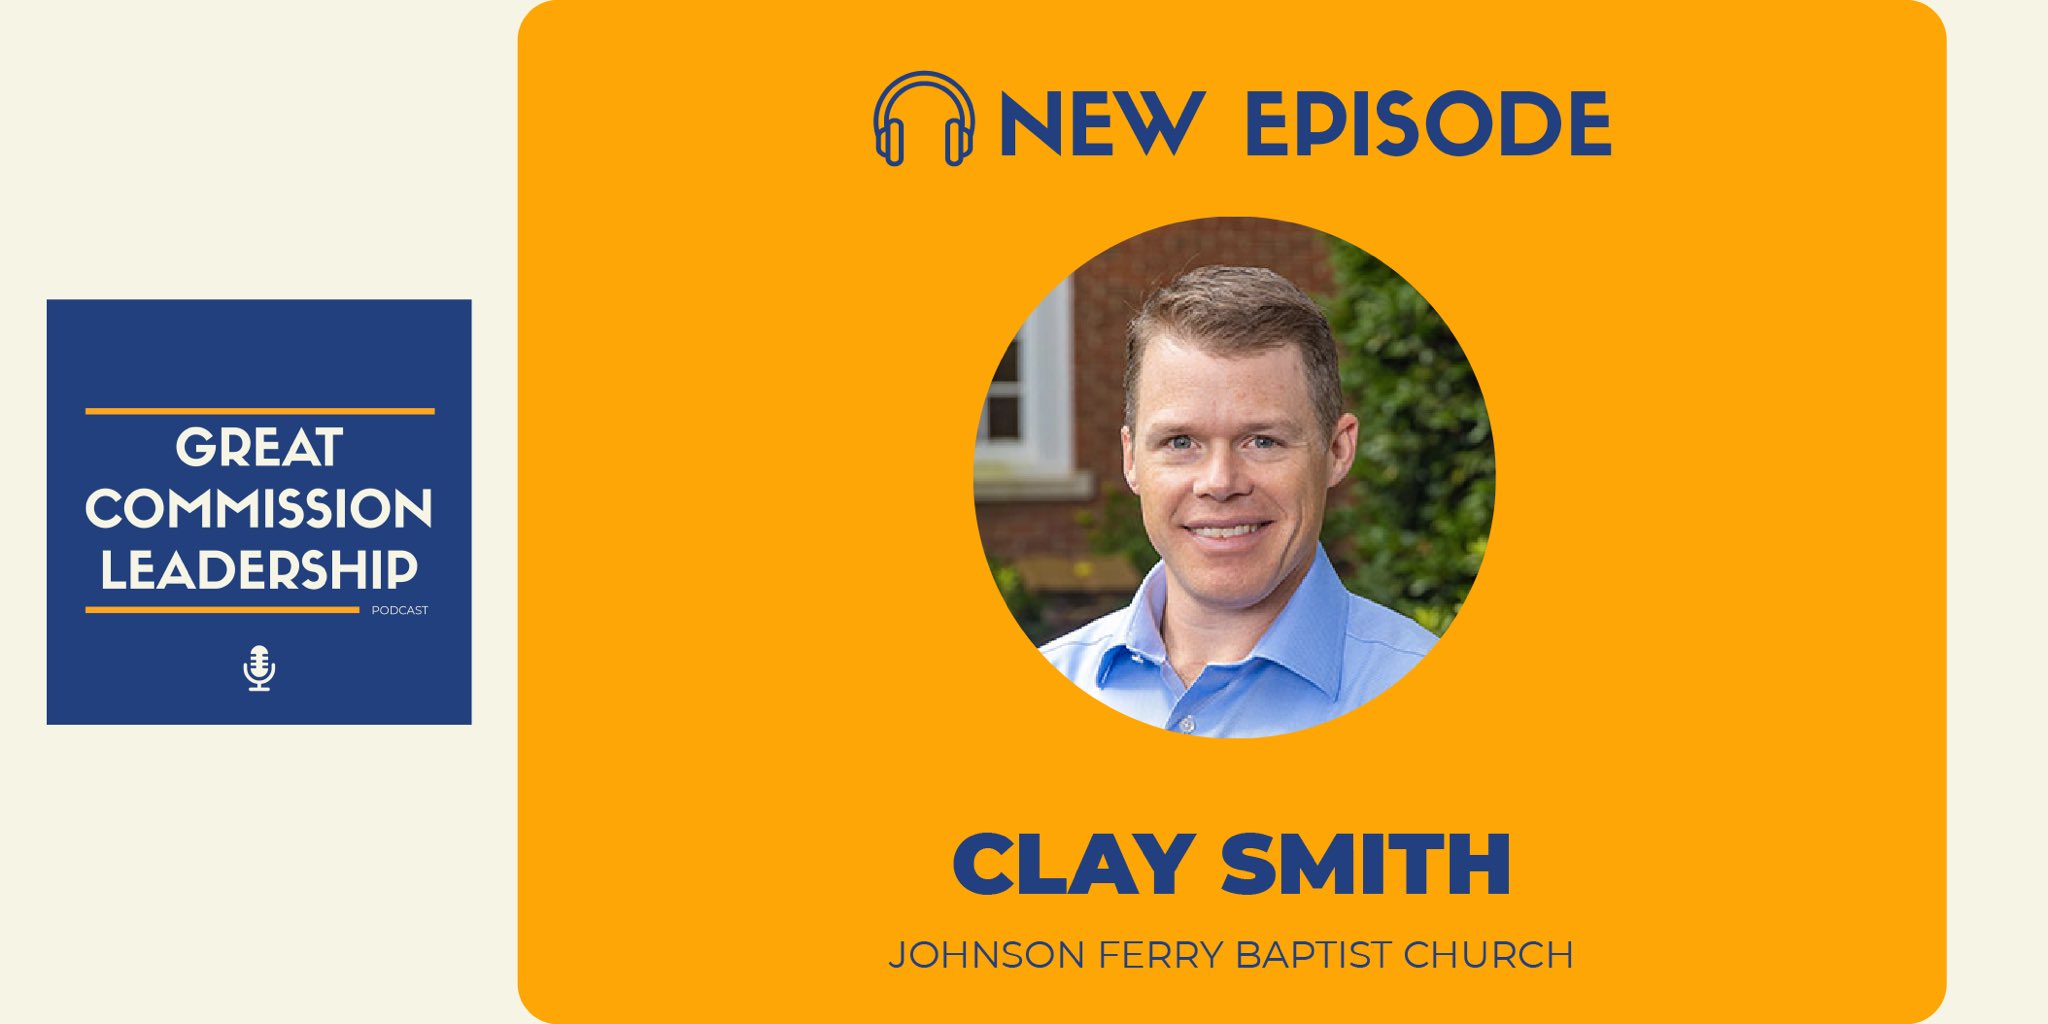 Listen to the Podcast with Ken Whitten from Idlewild Baptist Church